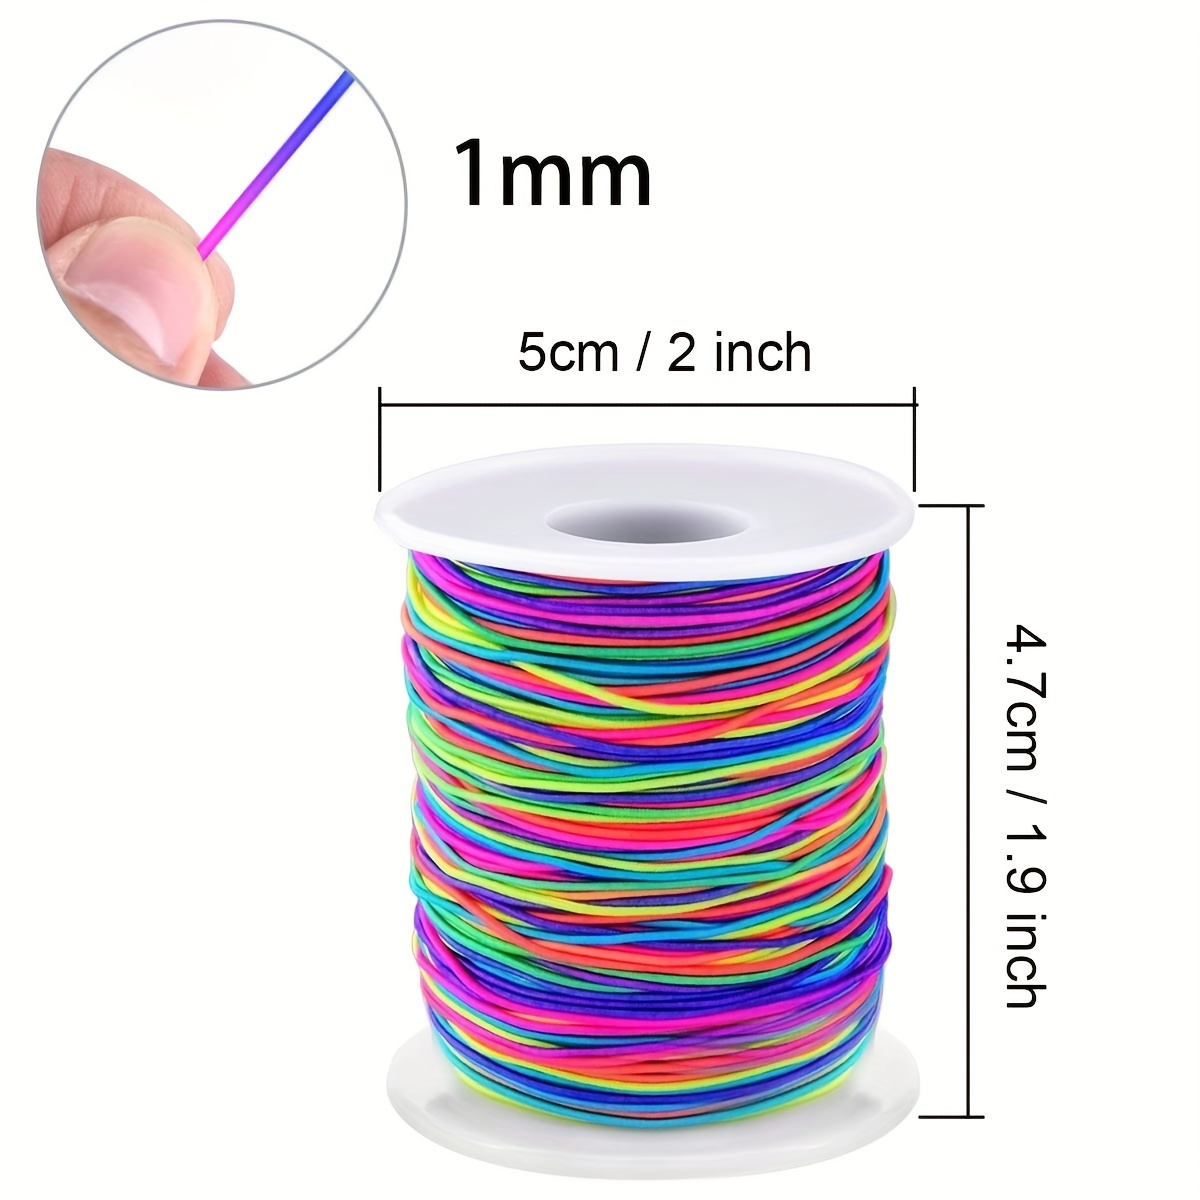 45m/147ft Rainbow Strings For Jewelry Making, Beading & Crafts -  1mm/0.039in Sturdy Thread Fabric Crafting Cords